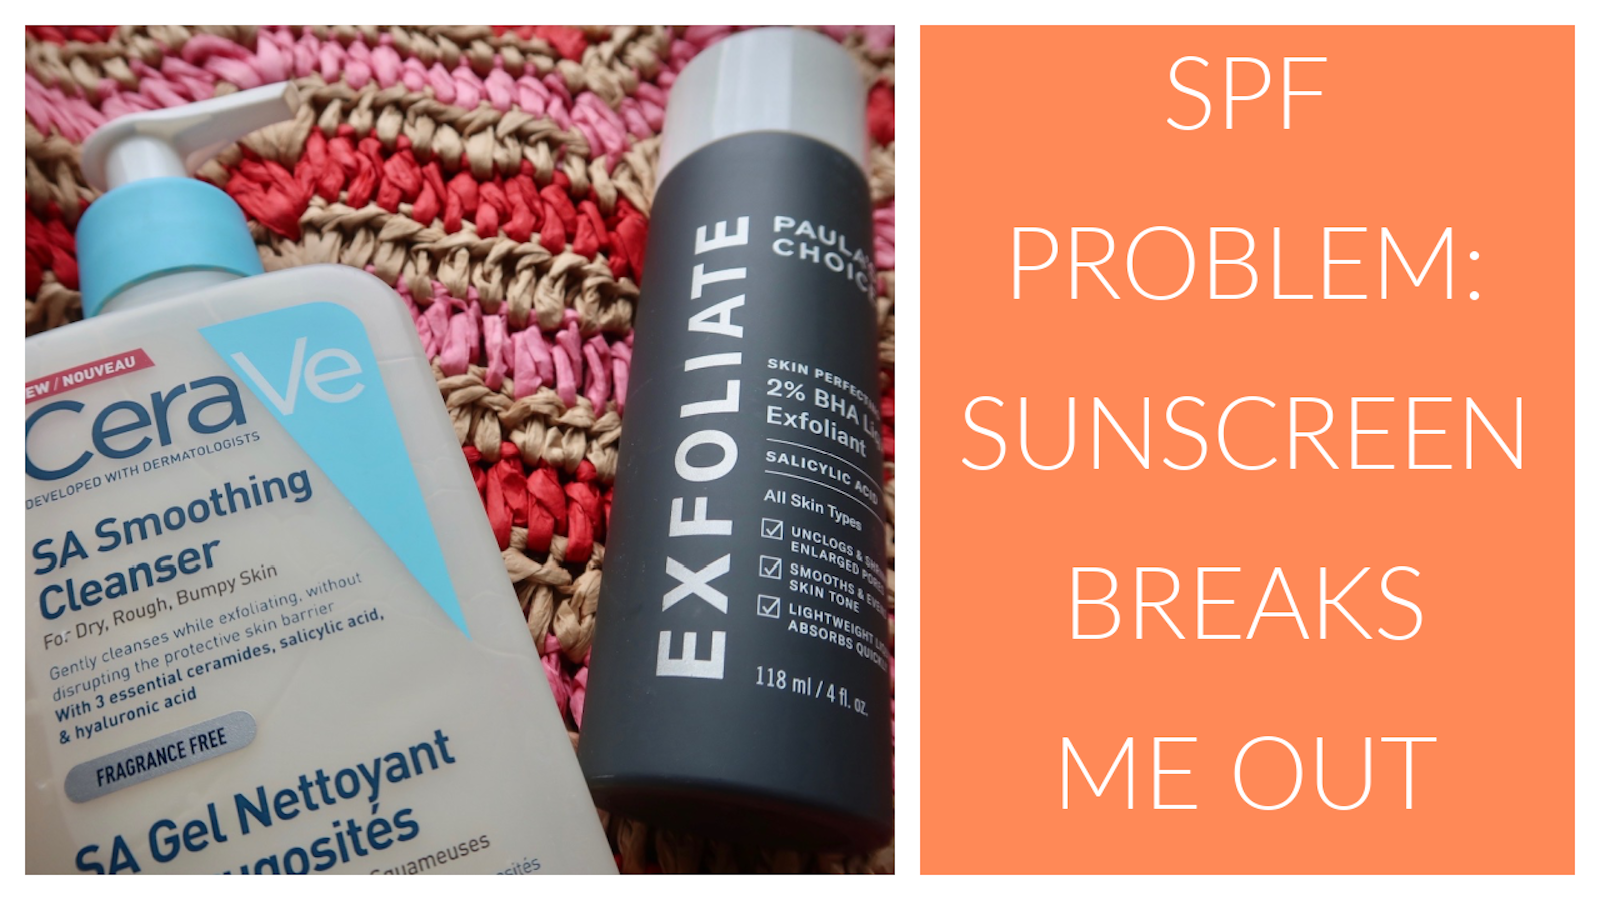 SPF Problem: Sunscreen Breaks Me Out